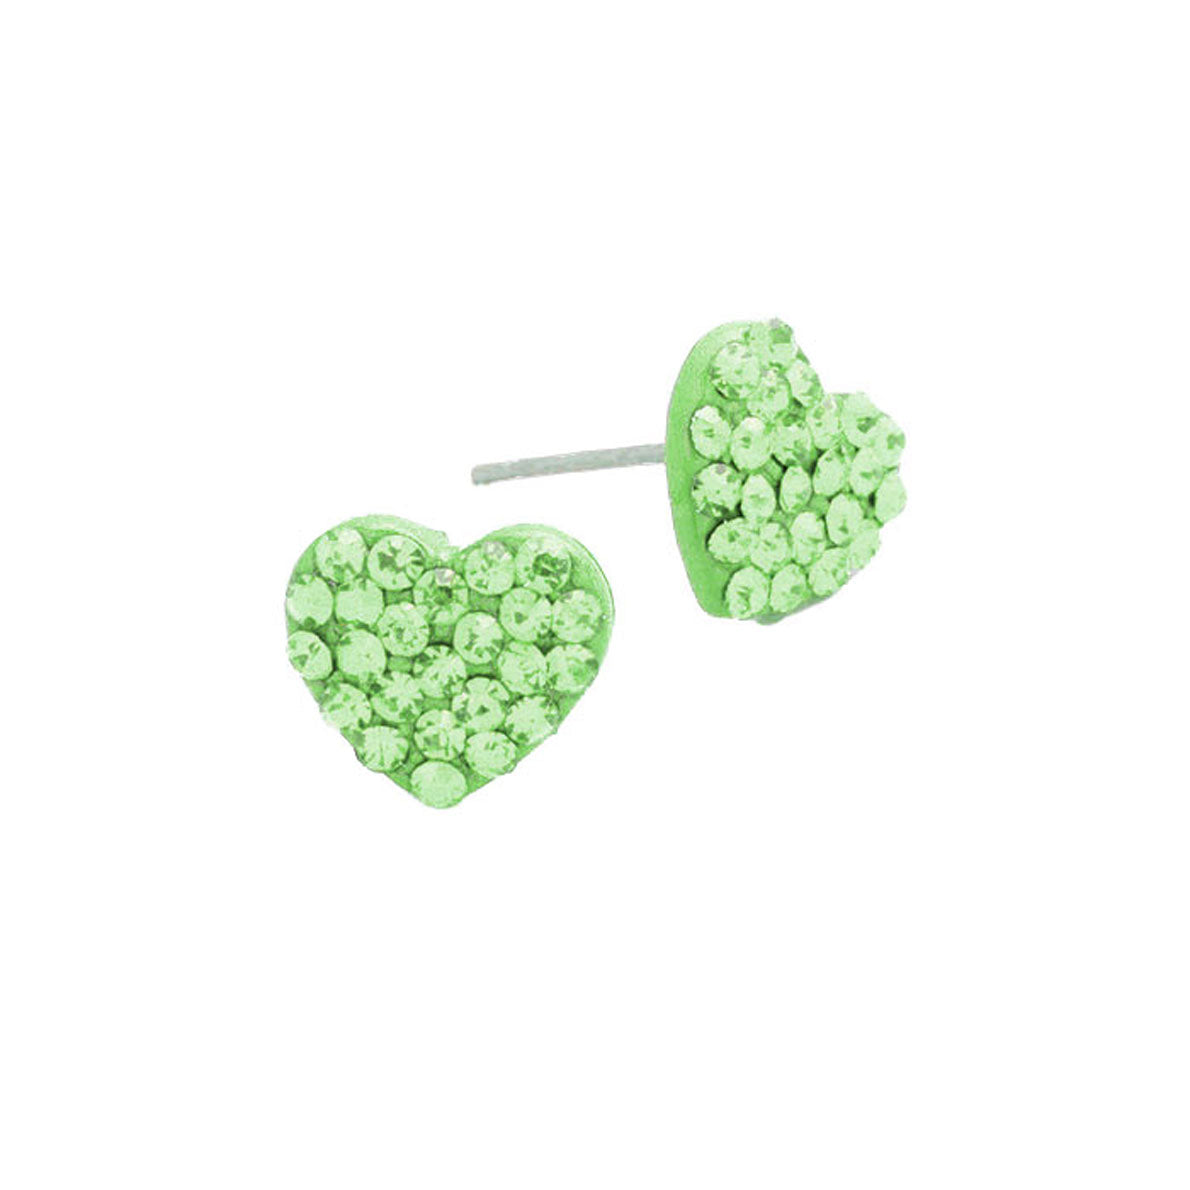 Peridot Crystal Rhinestone Pave Heart Stud Earrings, put on a pop of color to complete your ensemble. Beautifully crafted design adds a gorgeous glow to any outfit. Perfect for adding just the right amount of shimmer & shine. Perfect for Birthday Gift, Anniversary Gift, Mother's Day Gift, Graduation Gift, Valentine's Day Gift.